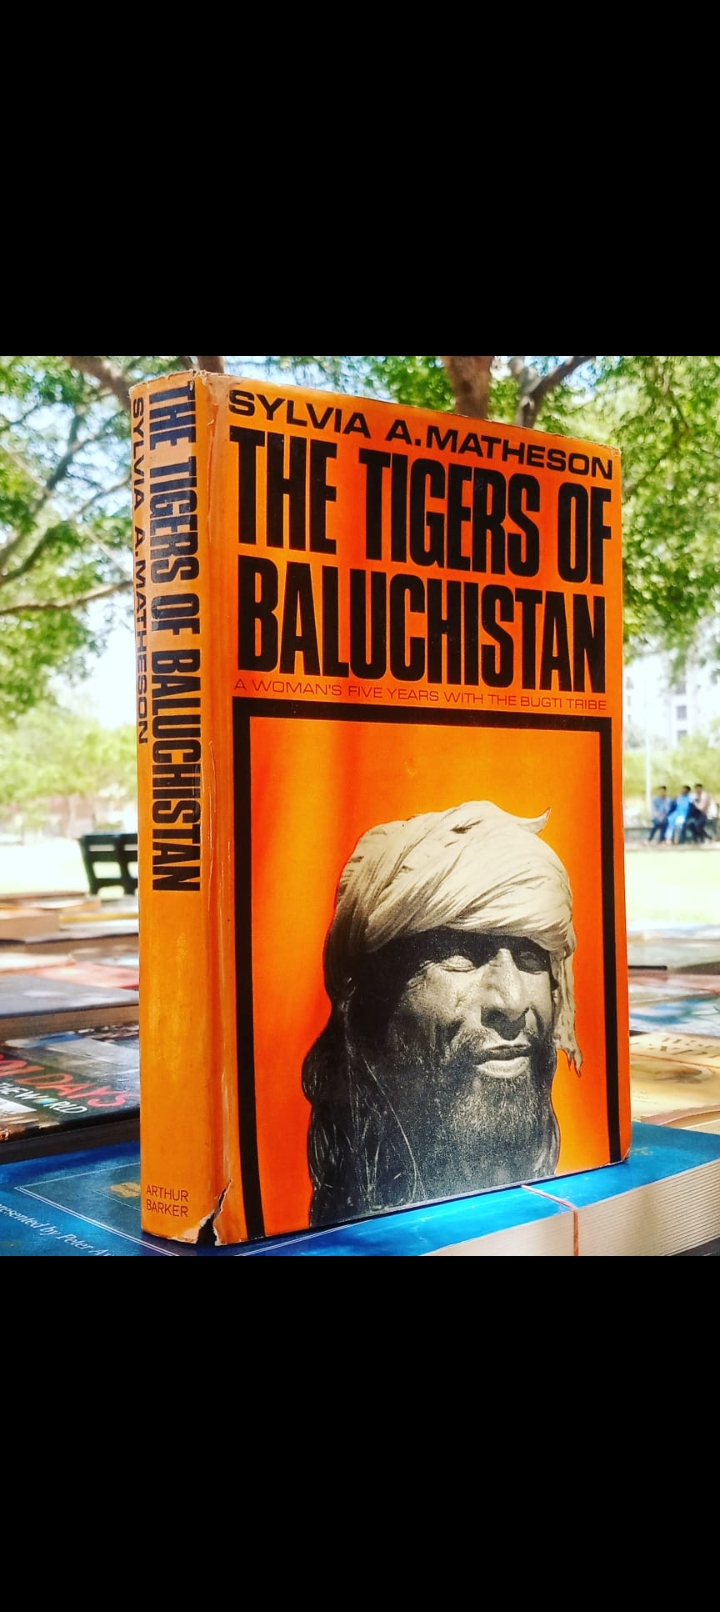 the tigers of baluchistan. a woman's five yeas with the bugti tribe by sylvia a.matheson. original h